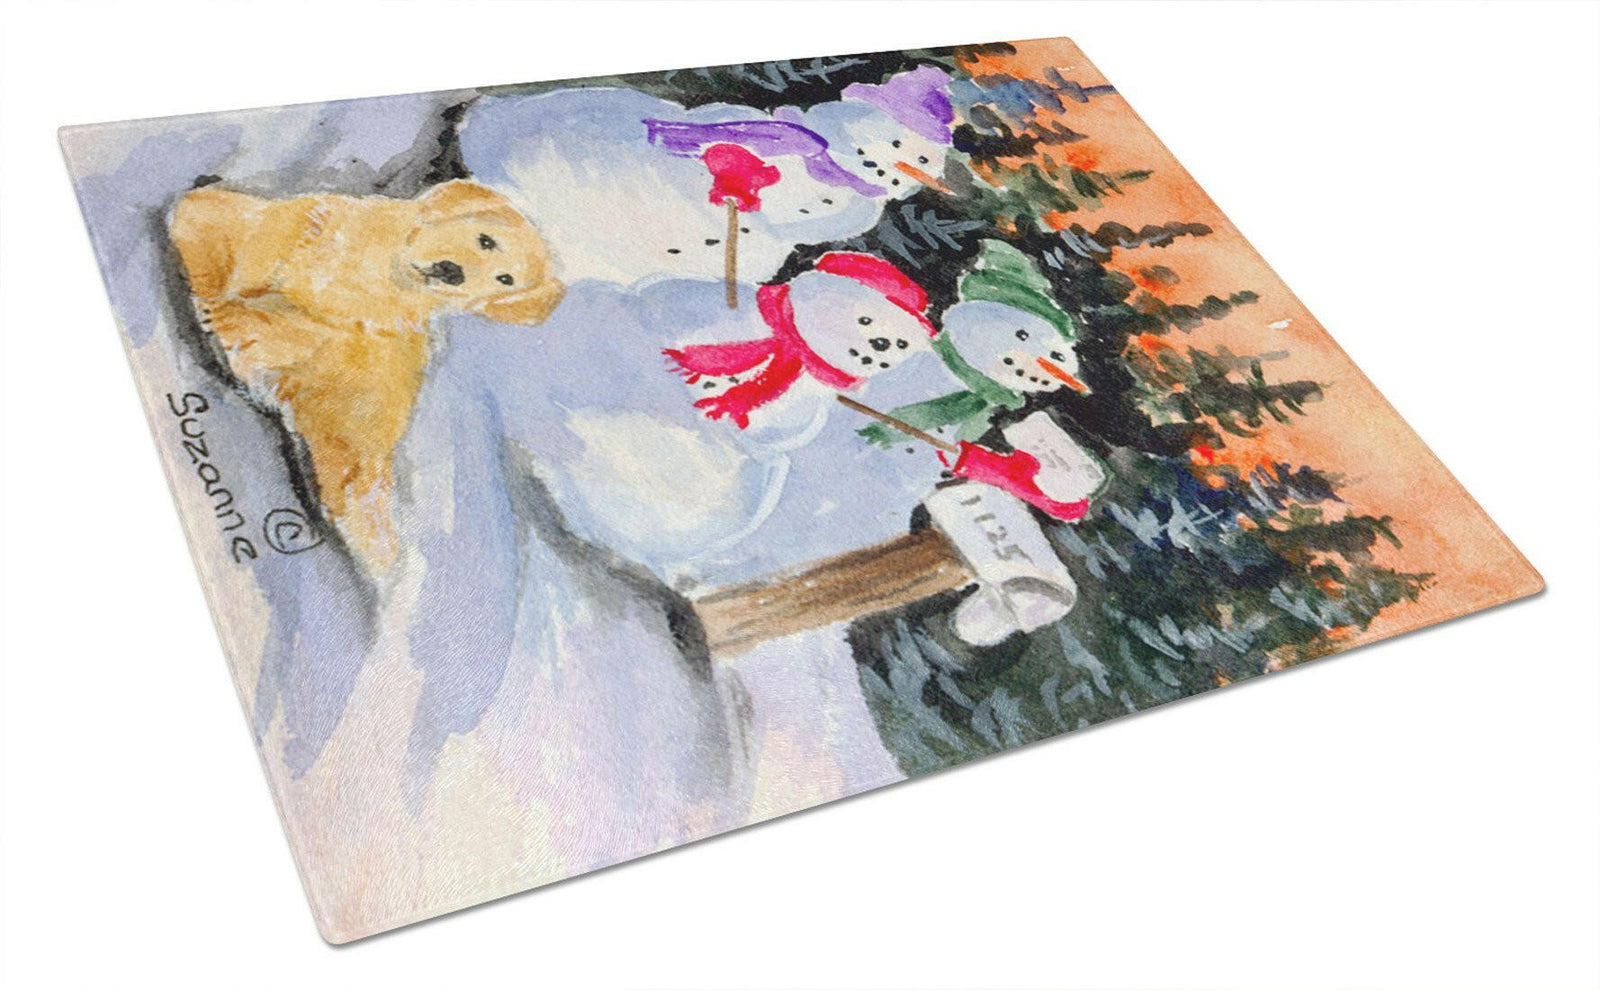 Snowman with Golden Retriever Glass Cutting Board Large by Caroline's Treasures